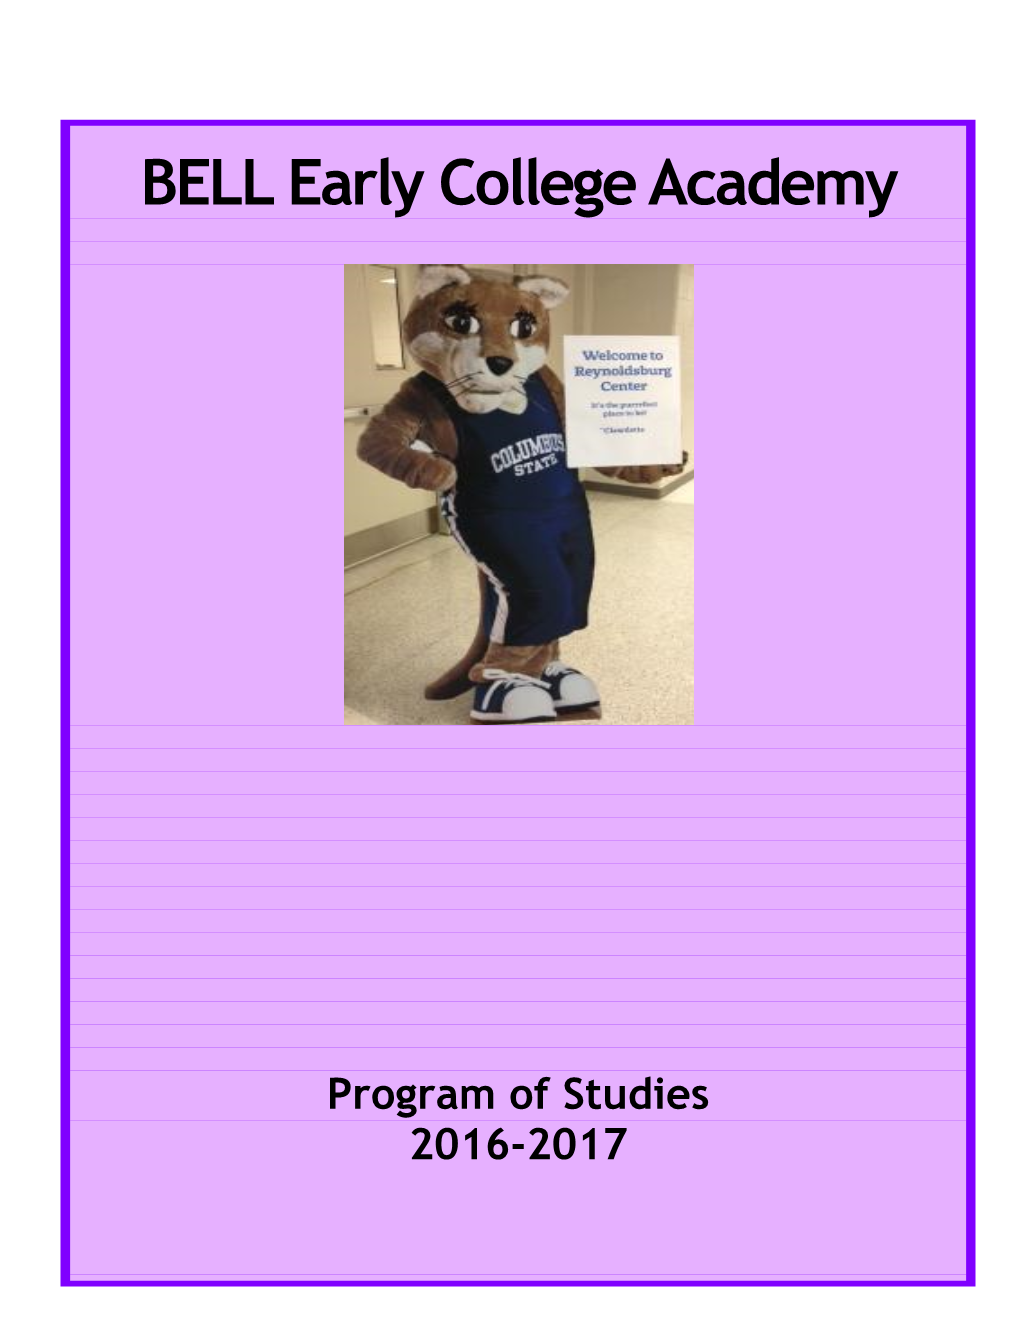 BELL Early College Academy